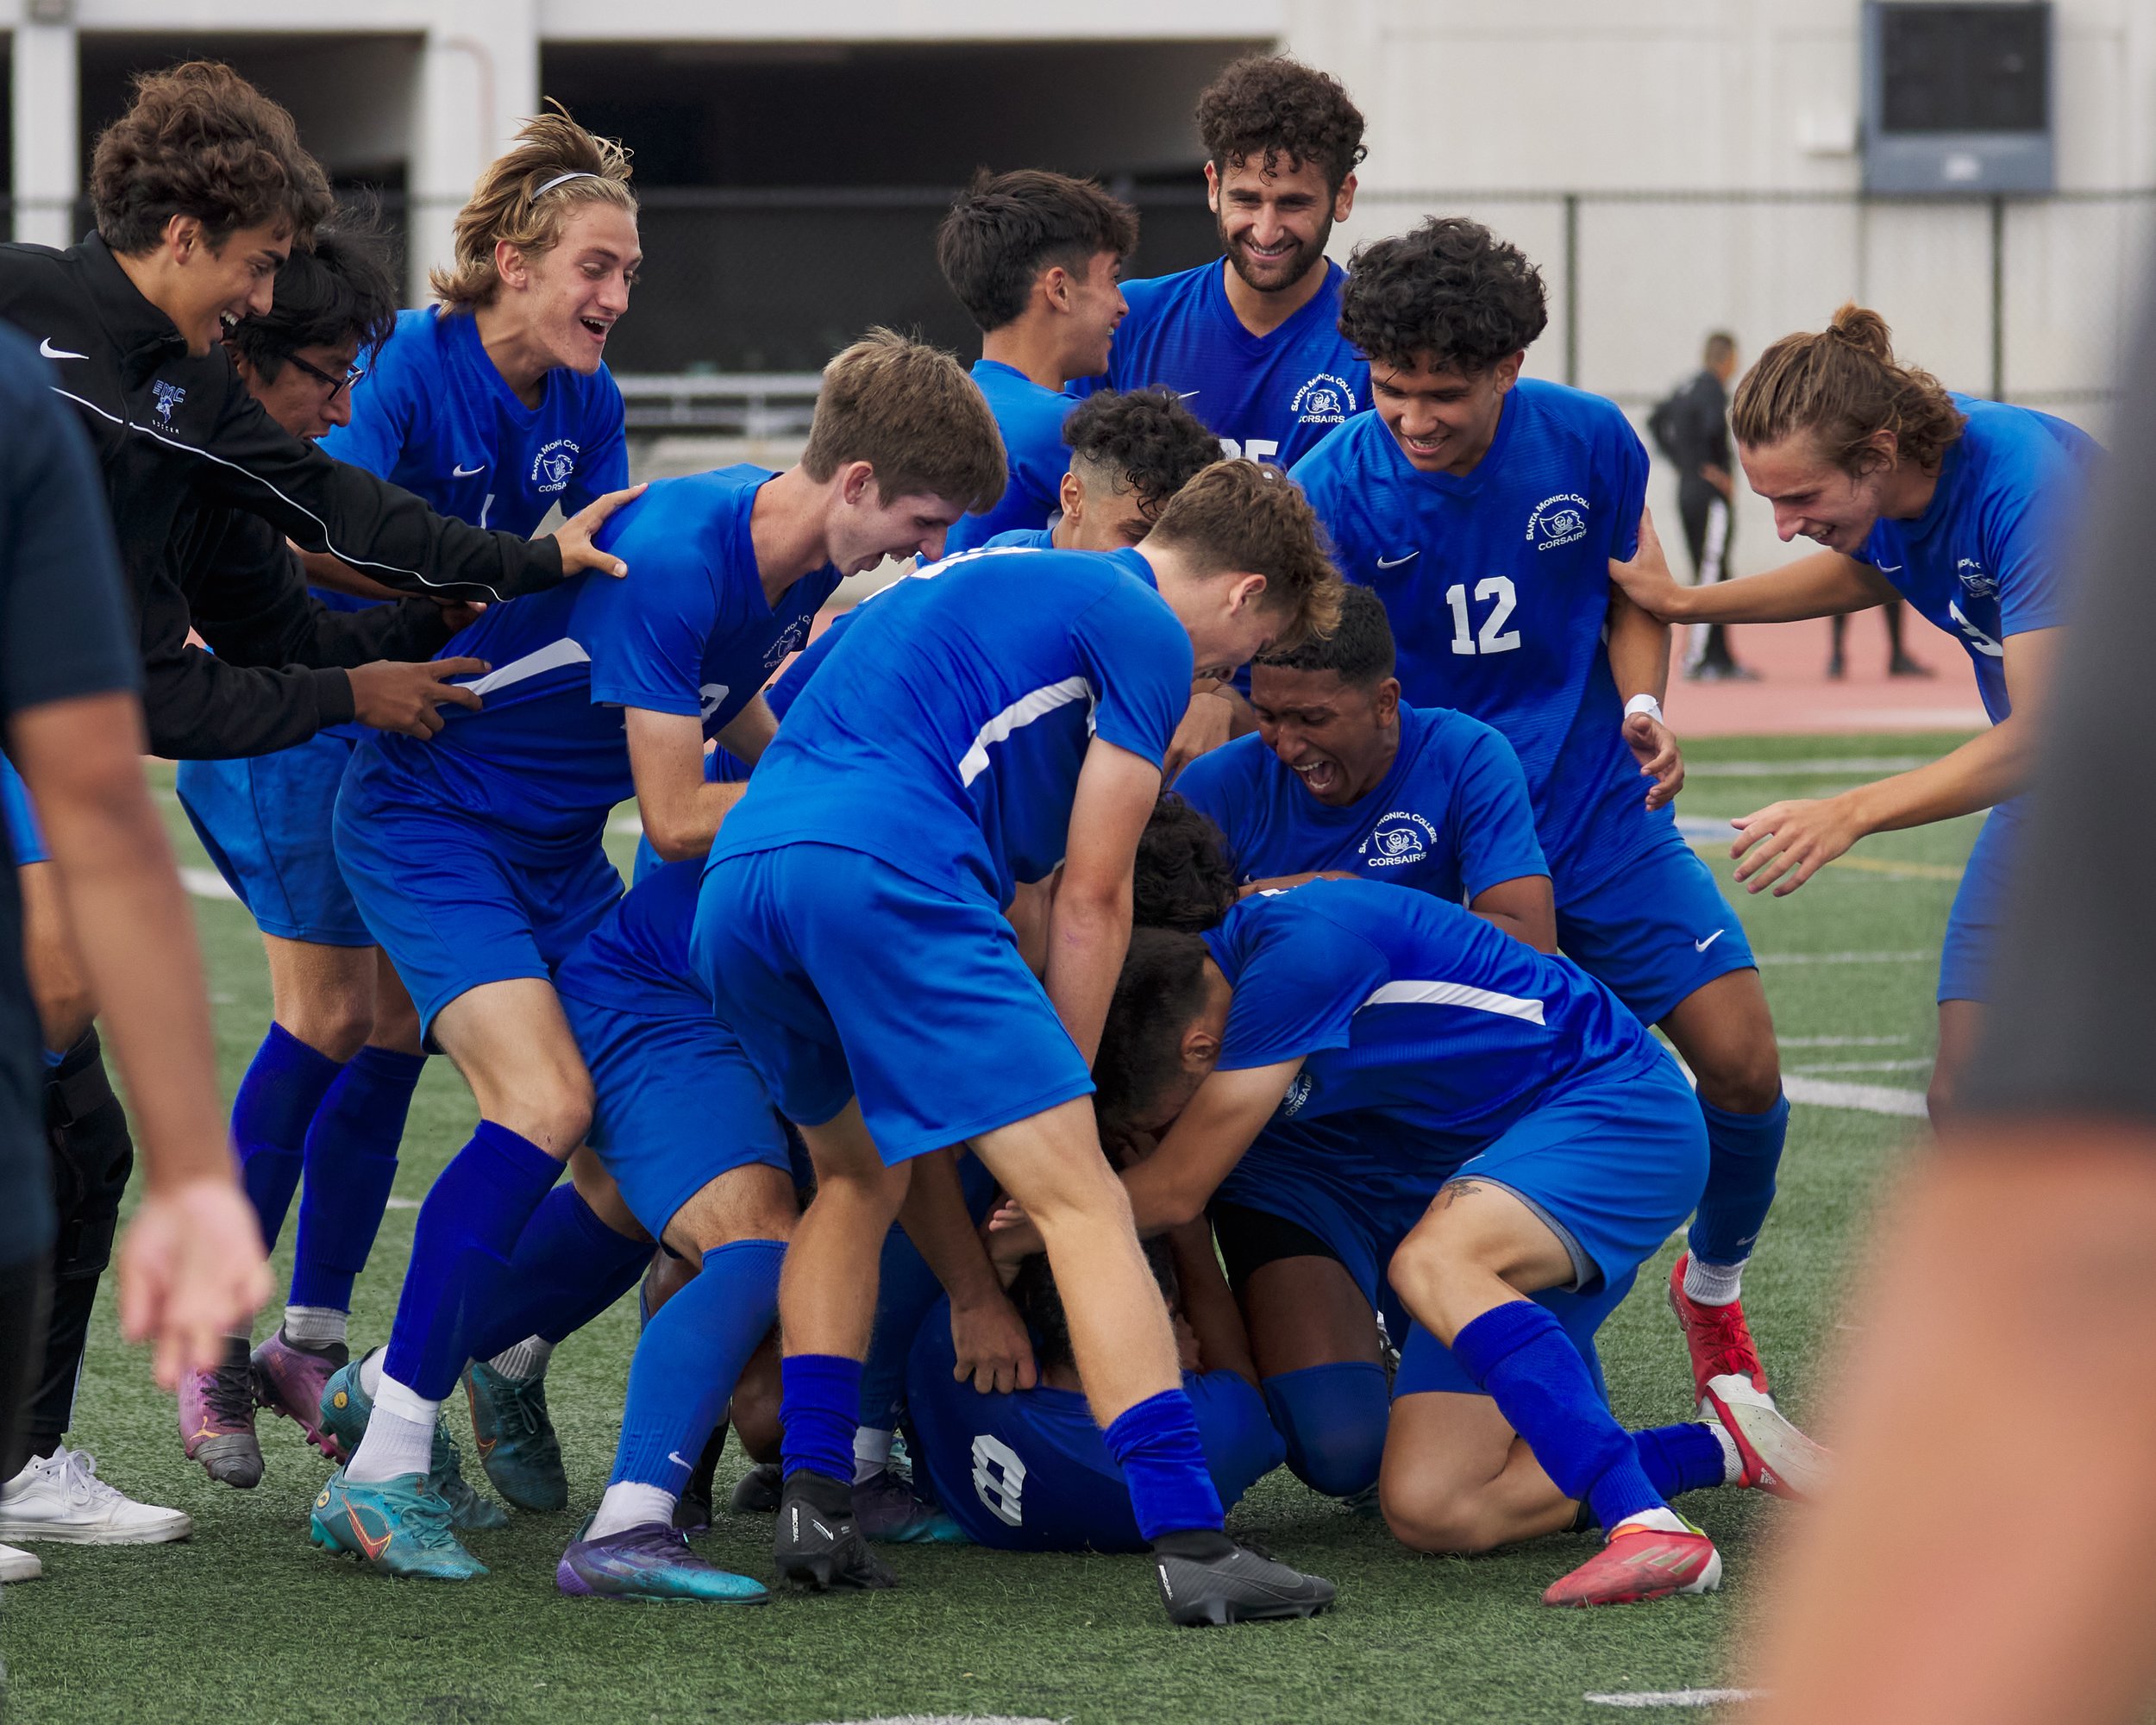  Members of the Santa Monica College Corsairs Men's Soccer team pile on Jaime Toledo (8, bottom) in celebration of his goal during the match against the Los Angeles Mission College Eagles on Tuesday, Nov. 1, 2022, at Corsair Field in Santa Monica, Ca